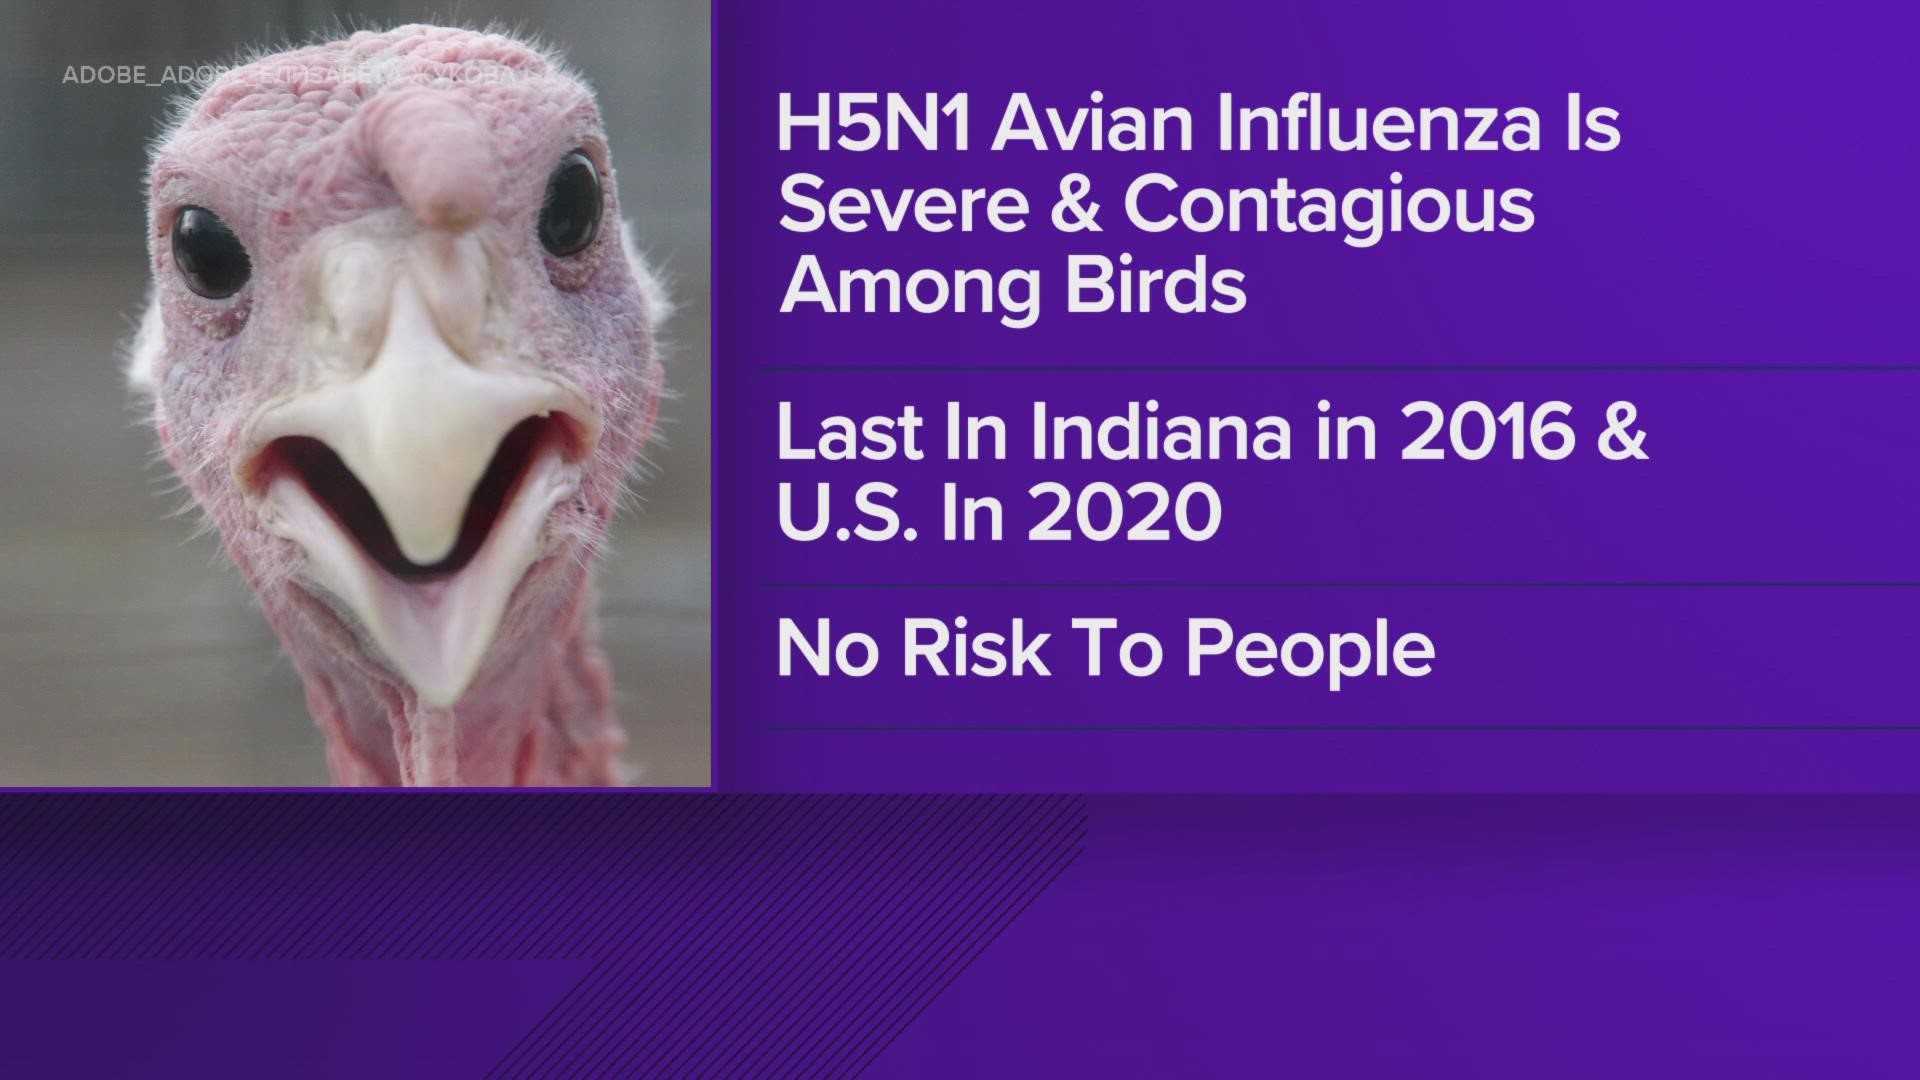 Avian influenza poses no risk to humans.